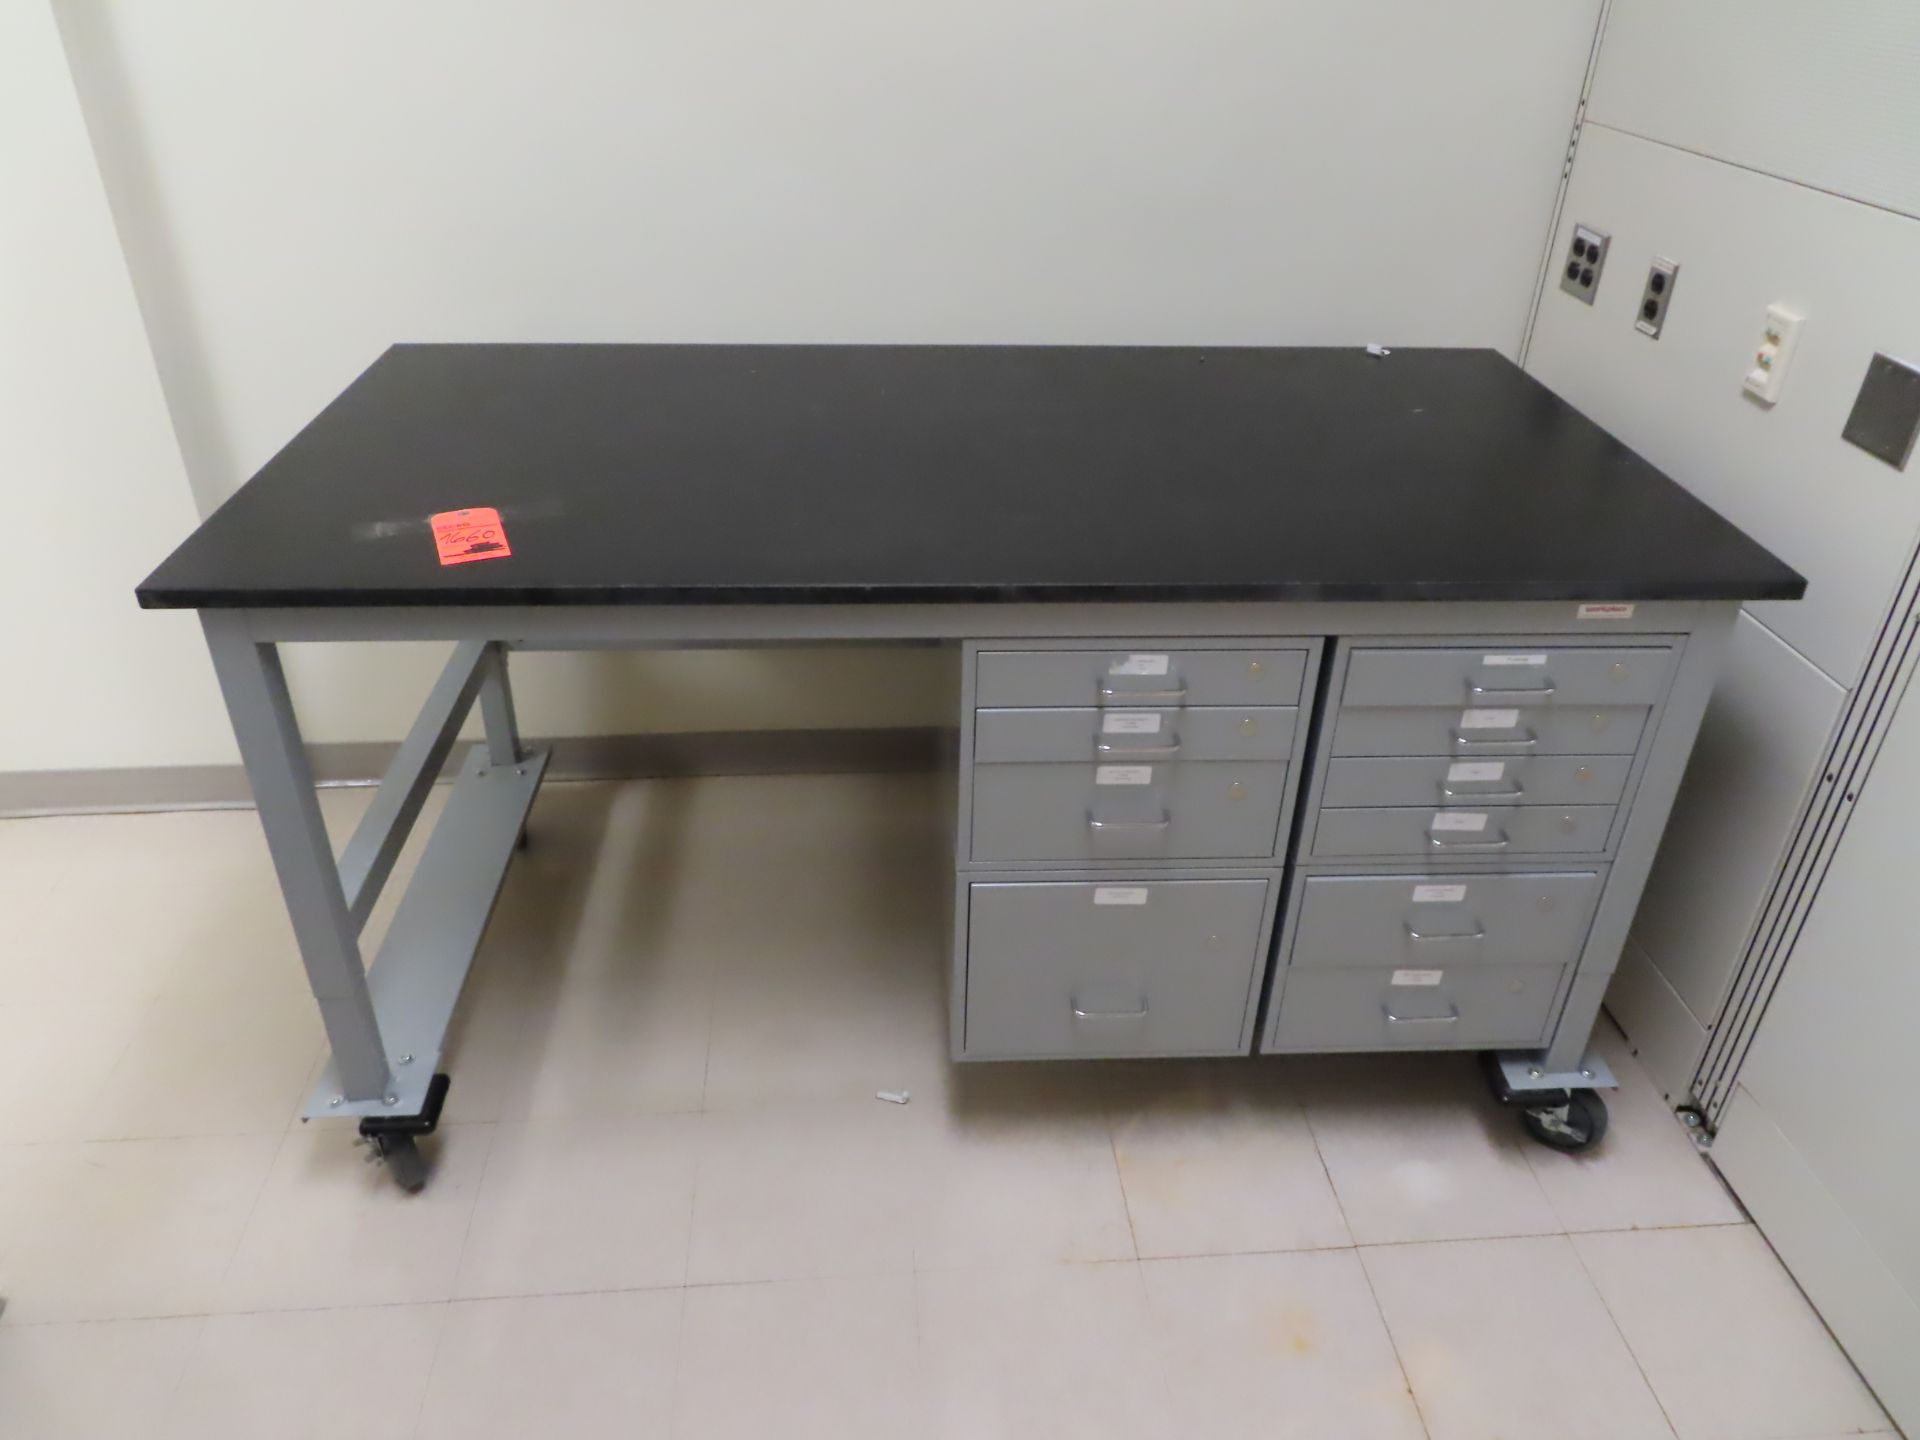 Mobil lab table, 6' X 3', located wing A, 3rd floor, room 305C